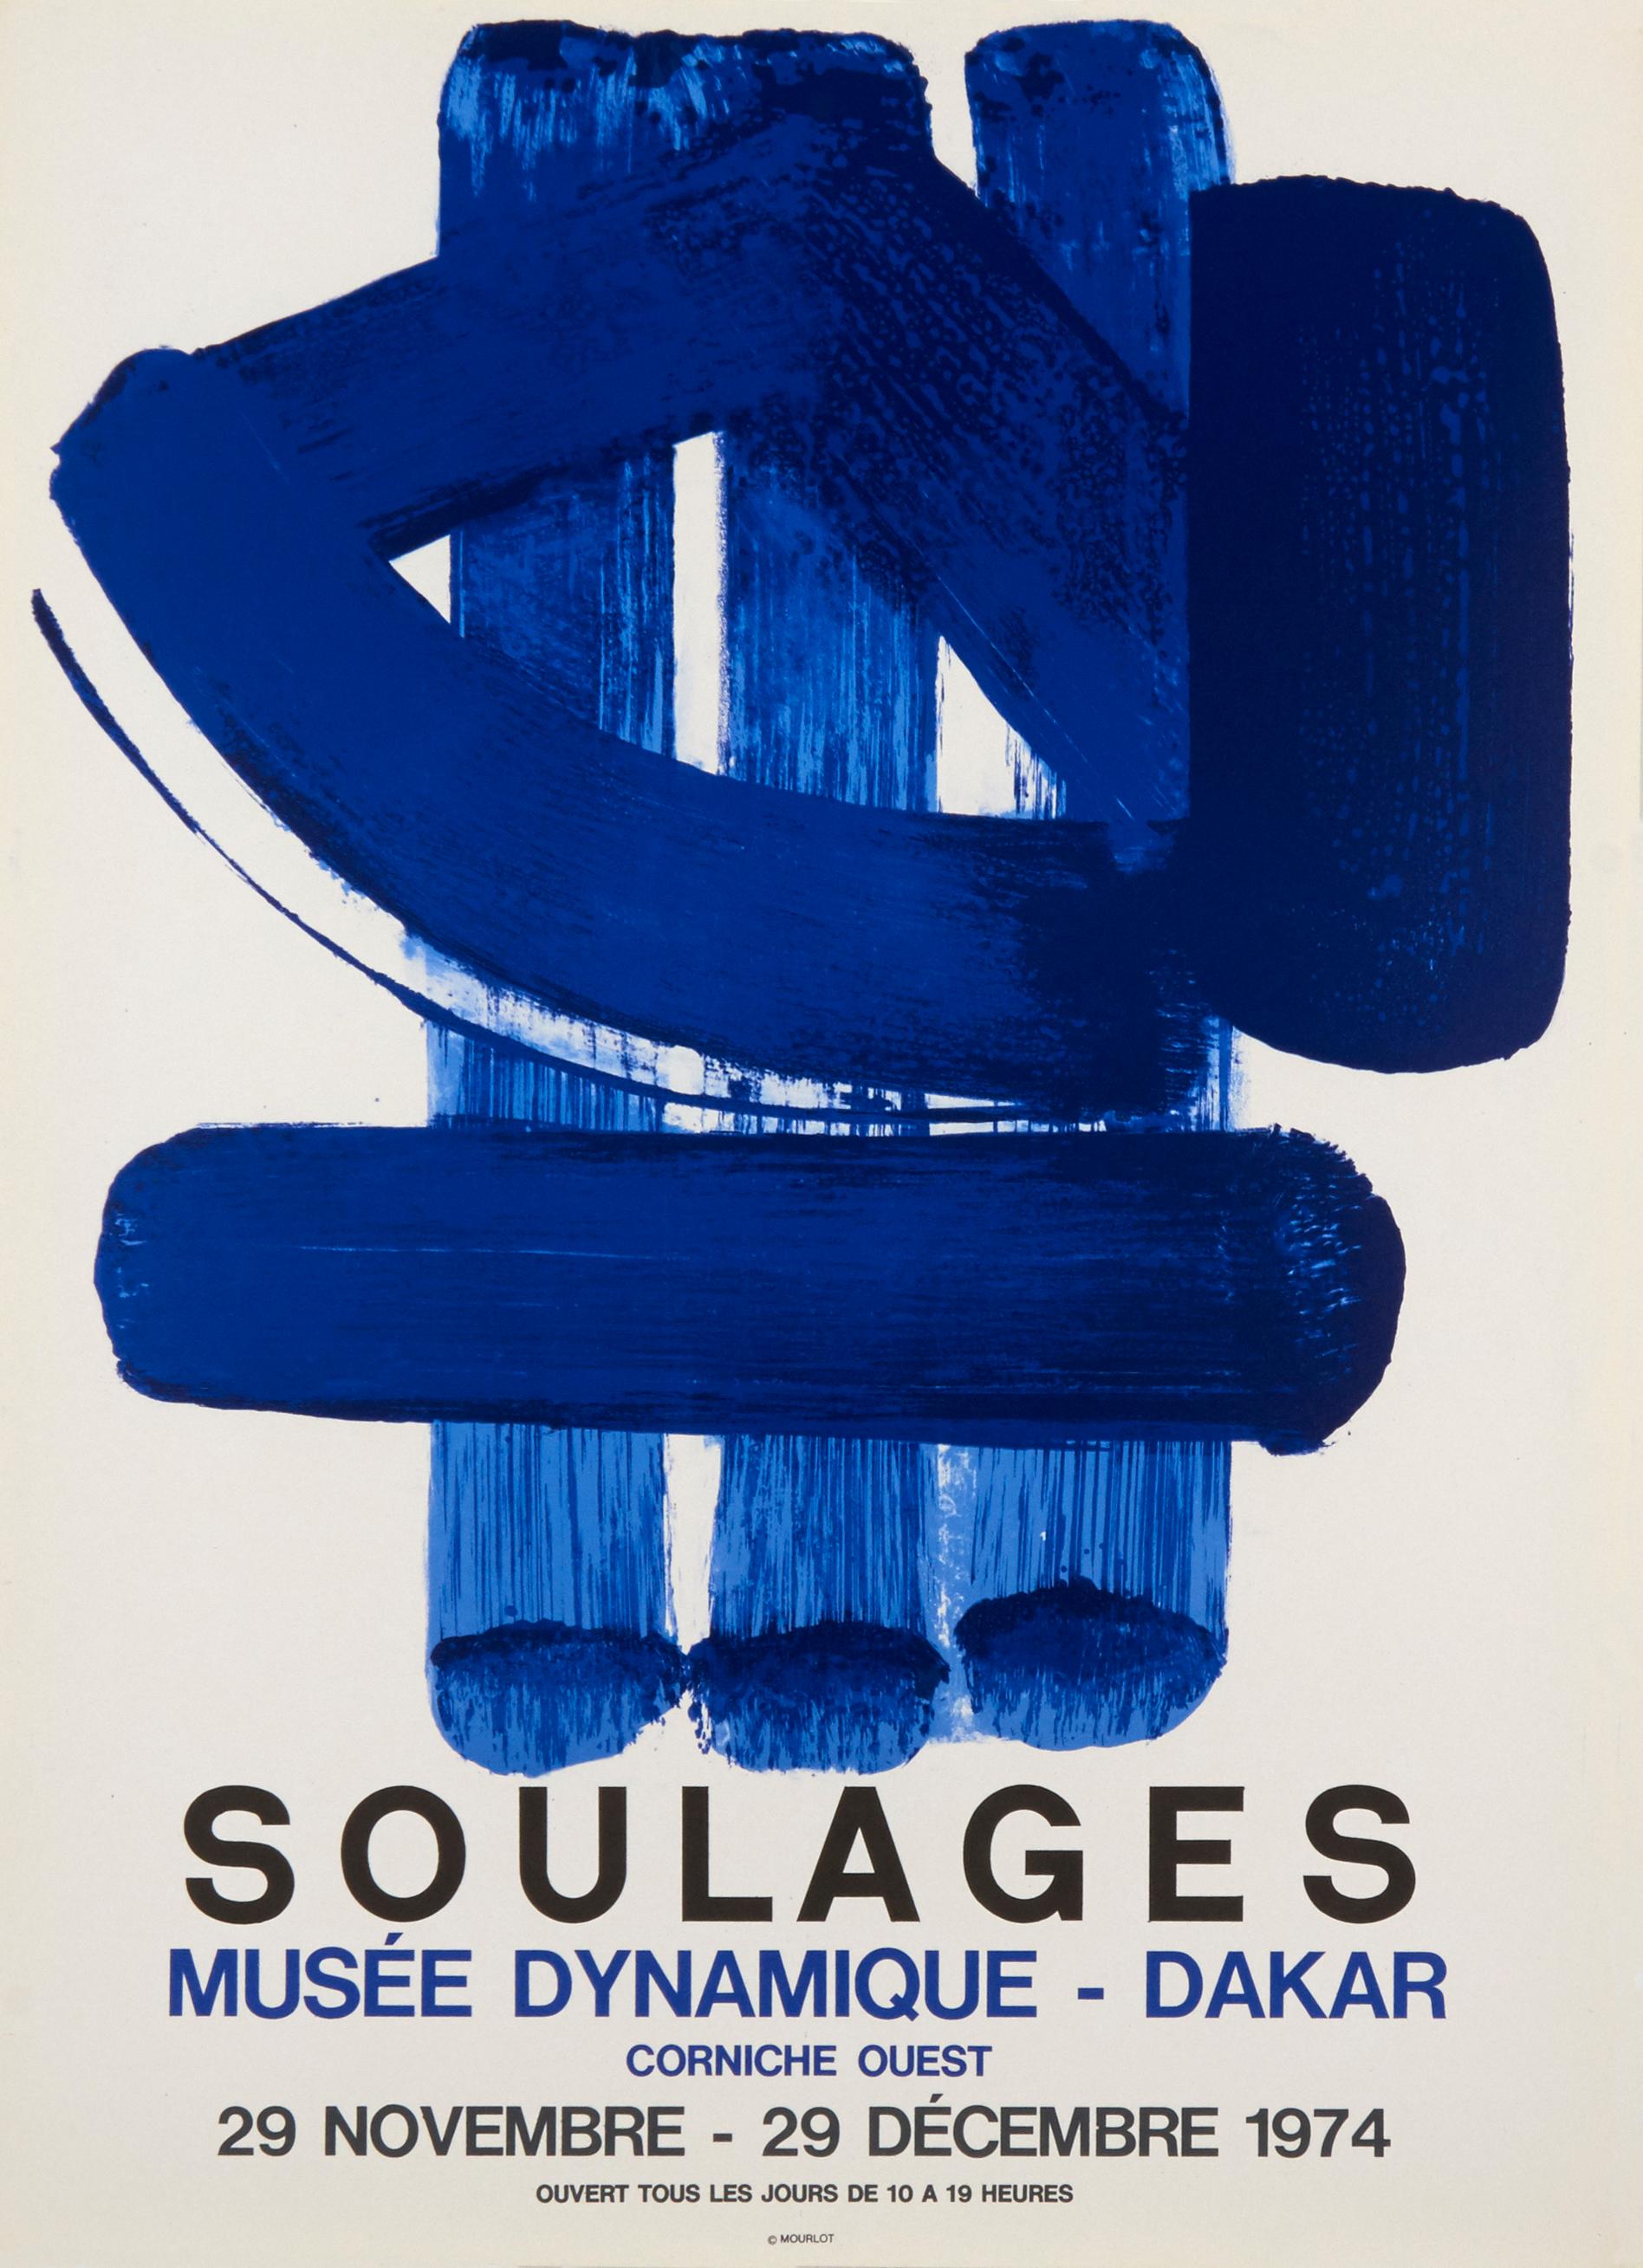 Pierre Soulages Abstract Print - Musee Dynamique - Dakar